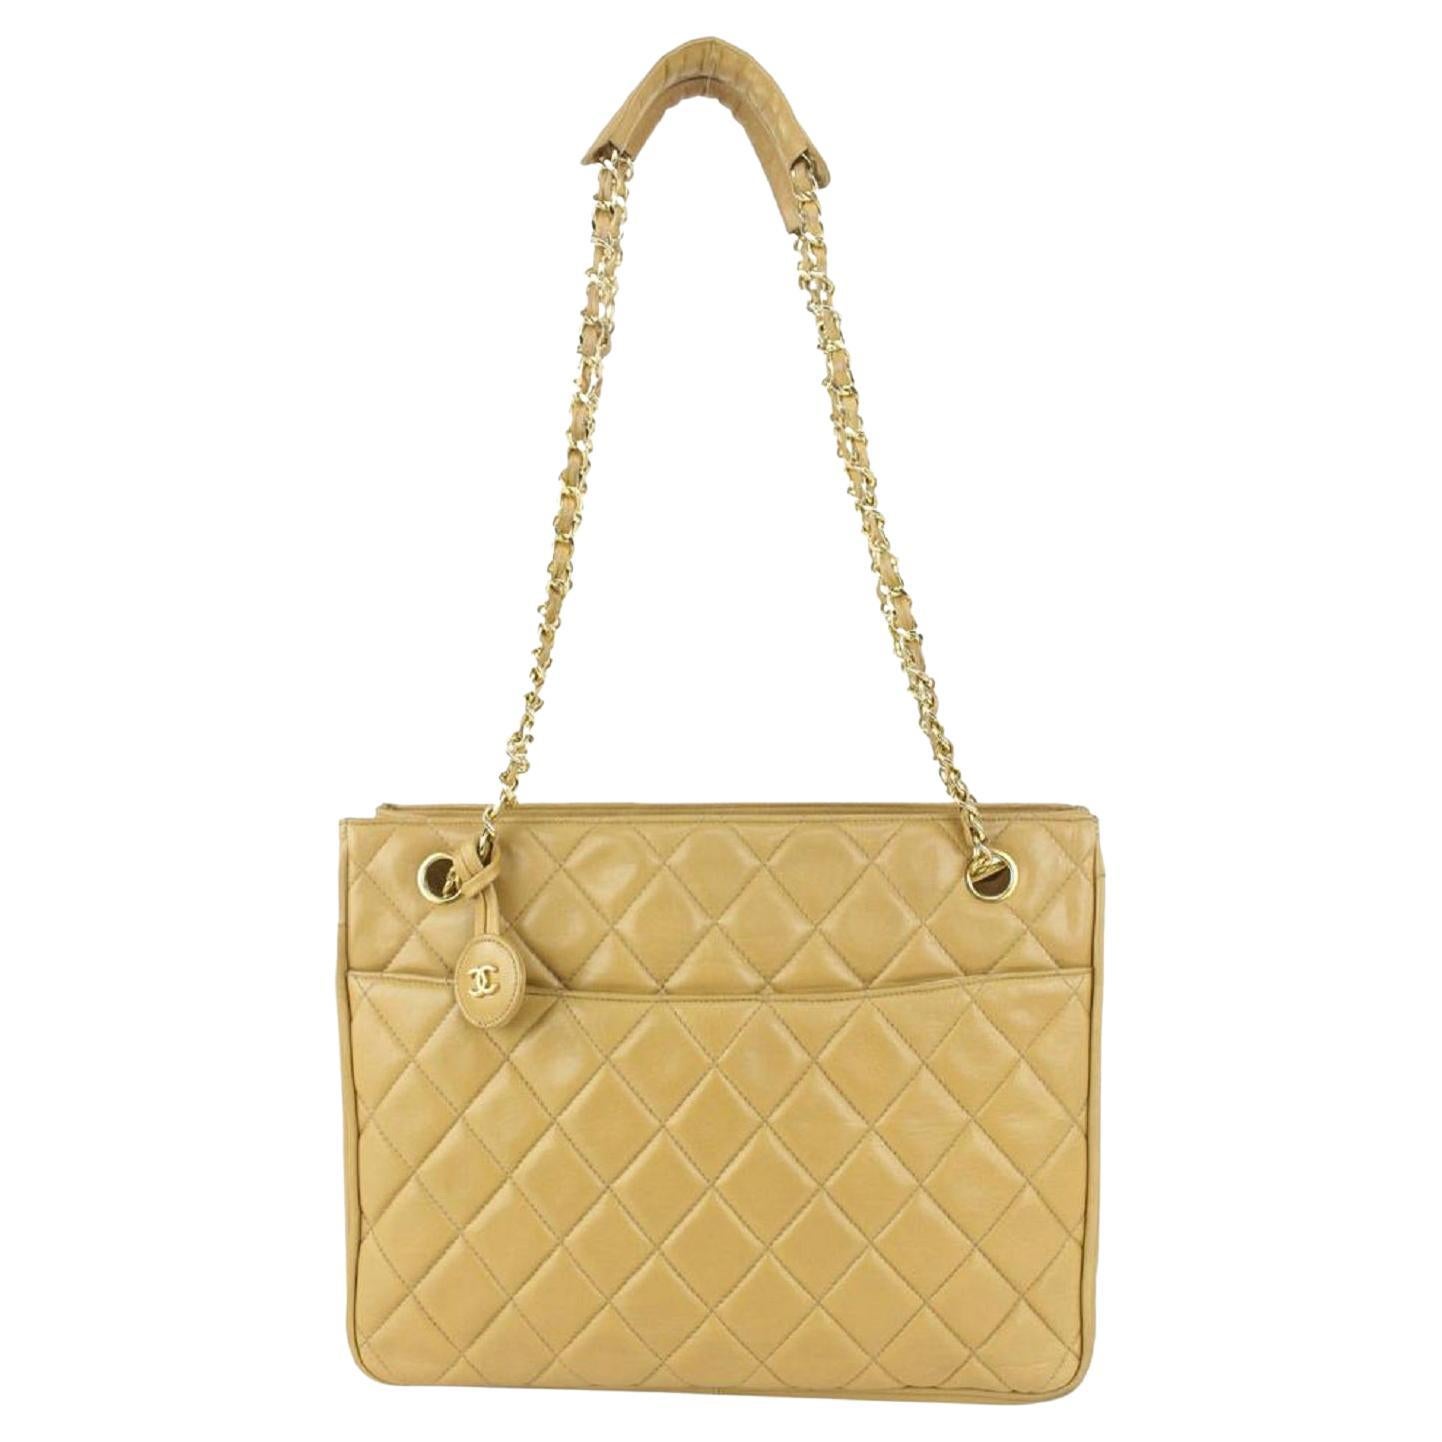 Chanel Beige Quilted Lambskin ShopperTote Chain Bag 593cas615 For Sale